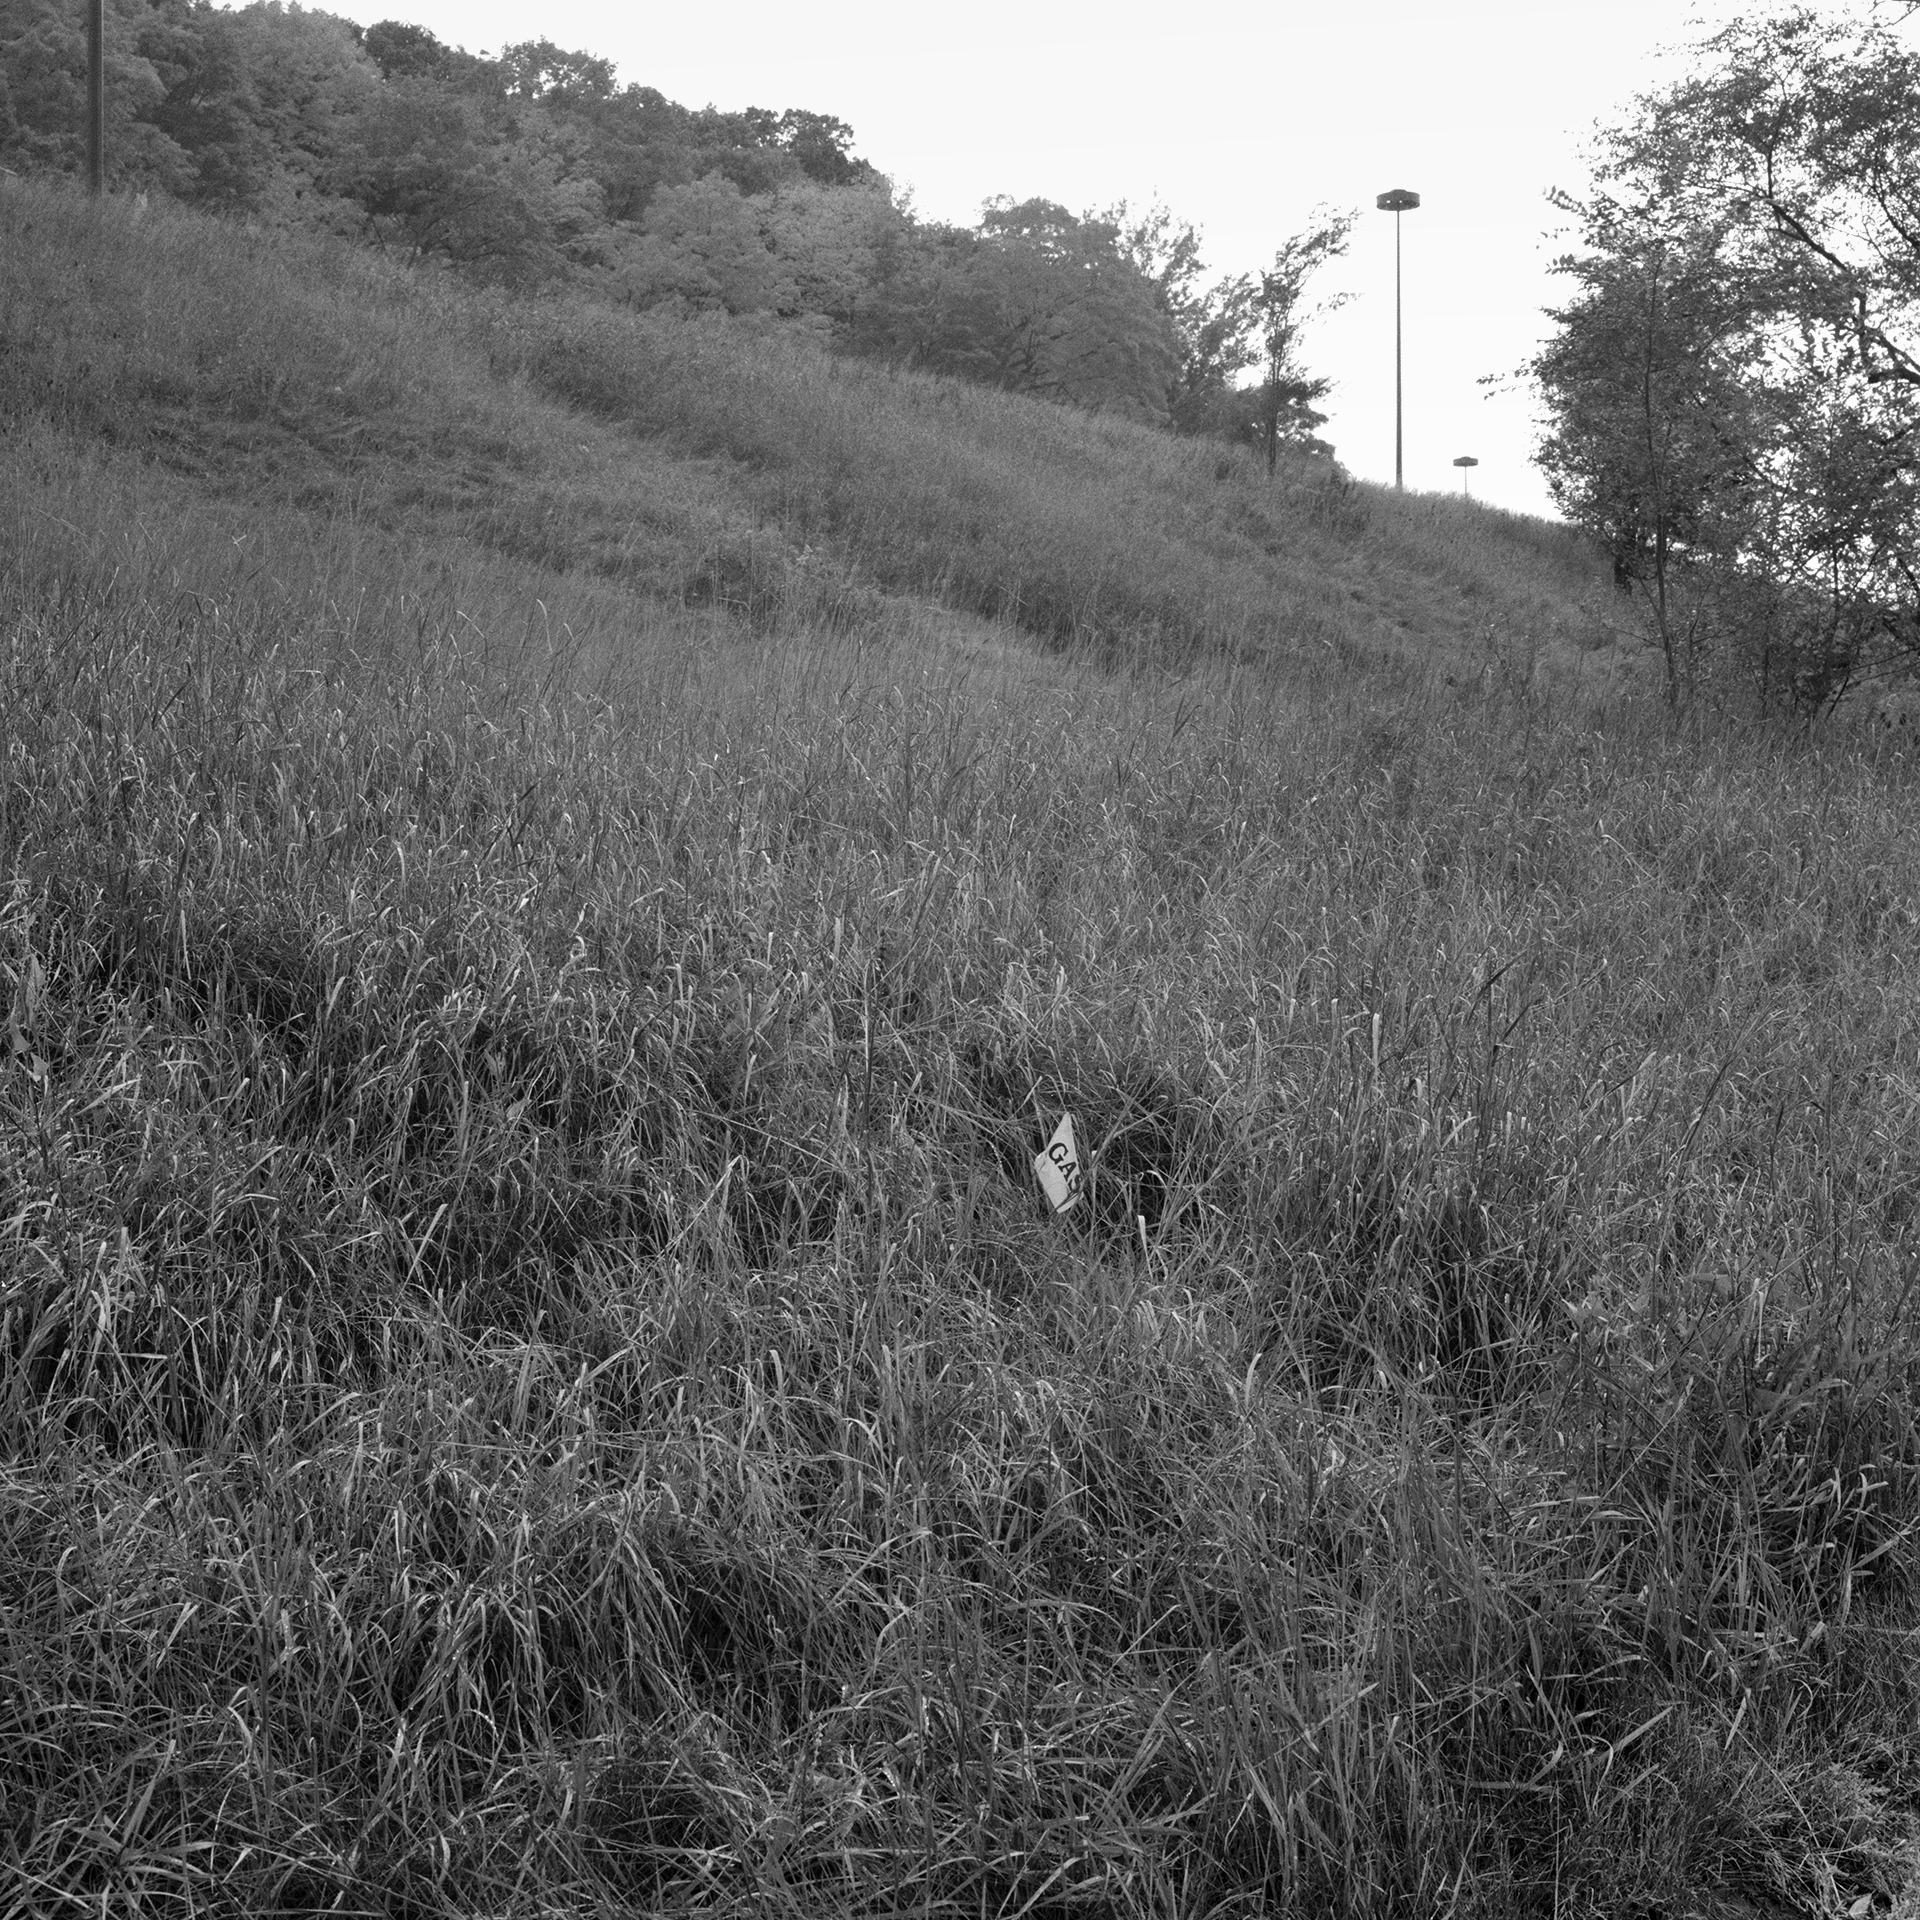 Where The River Runs # 9: A square black and white photograph of a gas line flag placed on a hillside of tall grass. The hillside takes up most of the frame, stretching up to the roadway and light fixtures running along the top of the image.